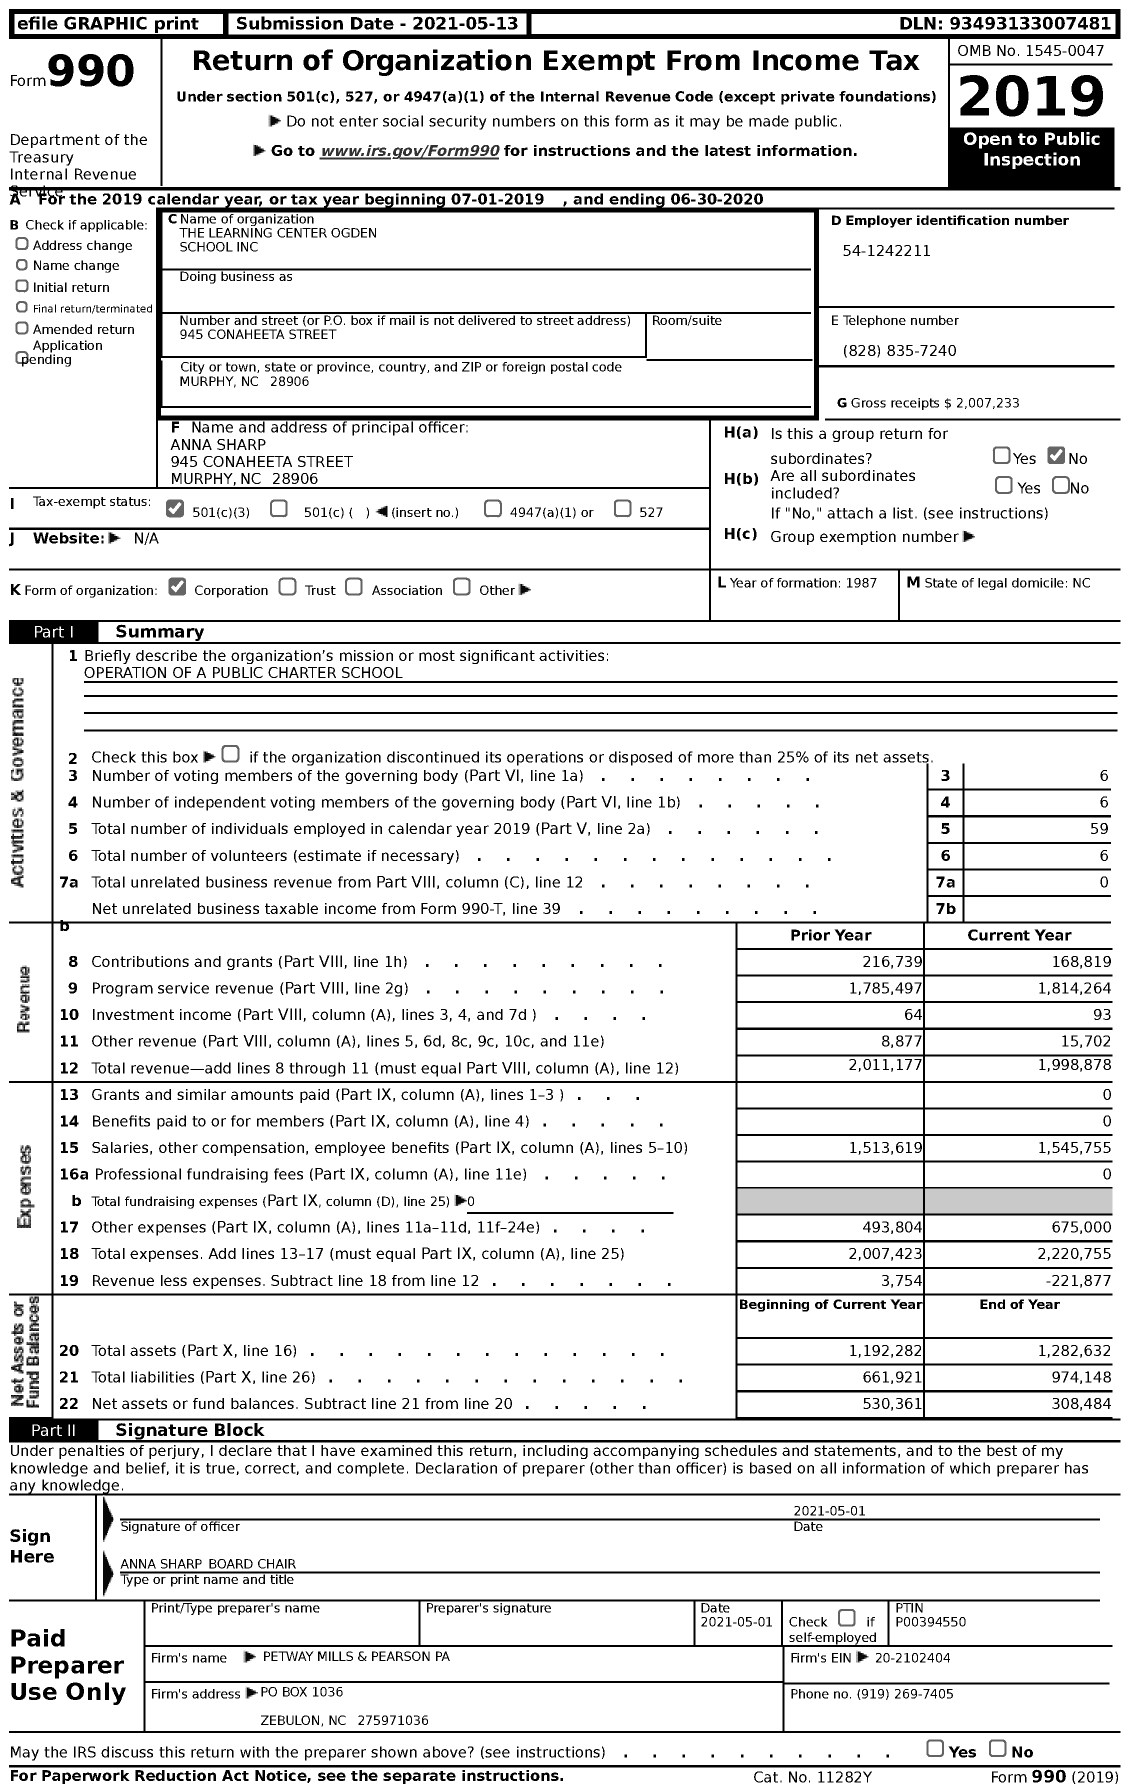 Image of first page of 2019 Form 990 for The Learning Center Ogden School